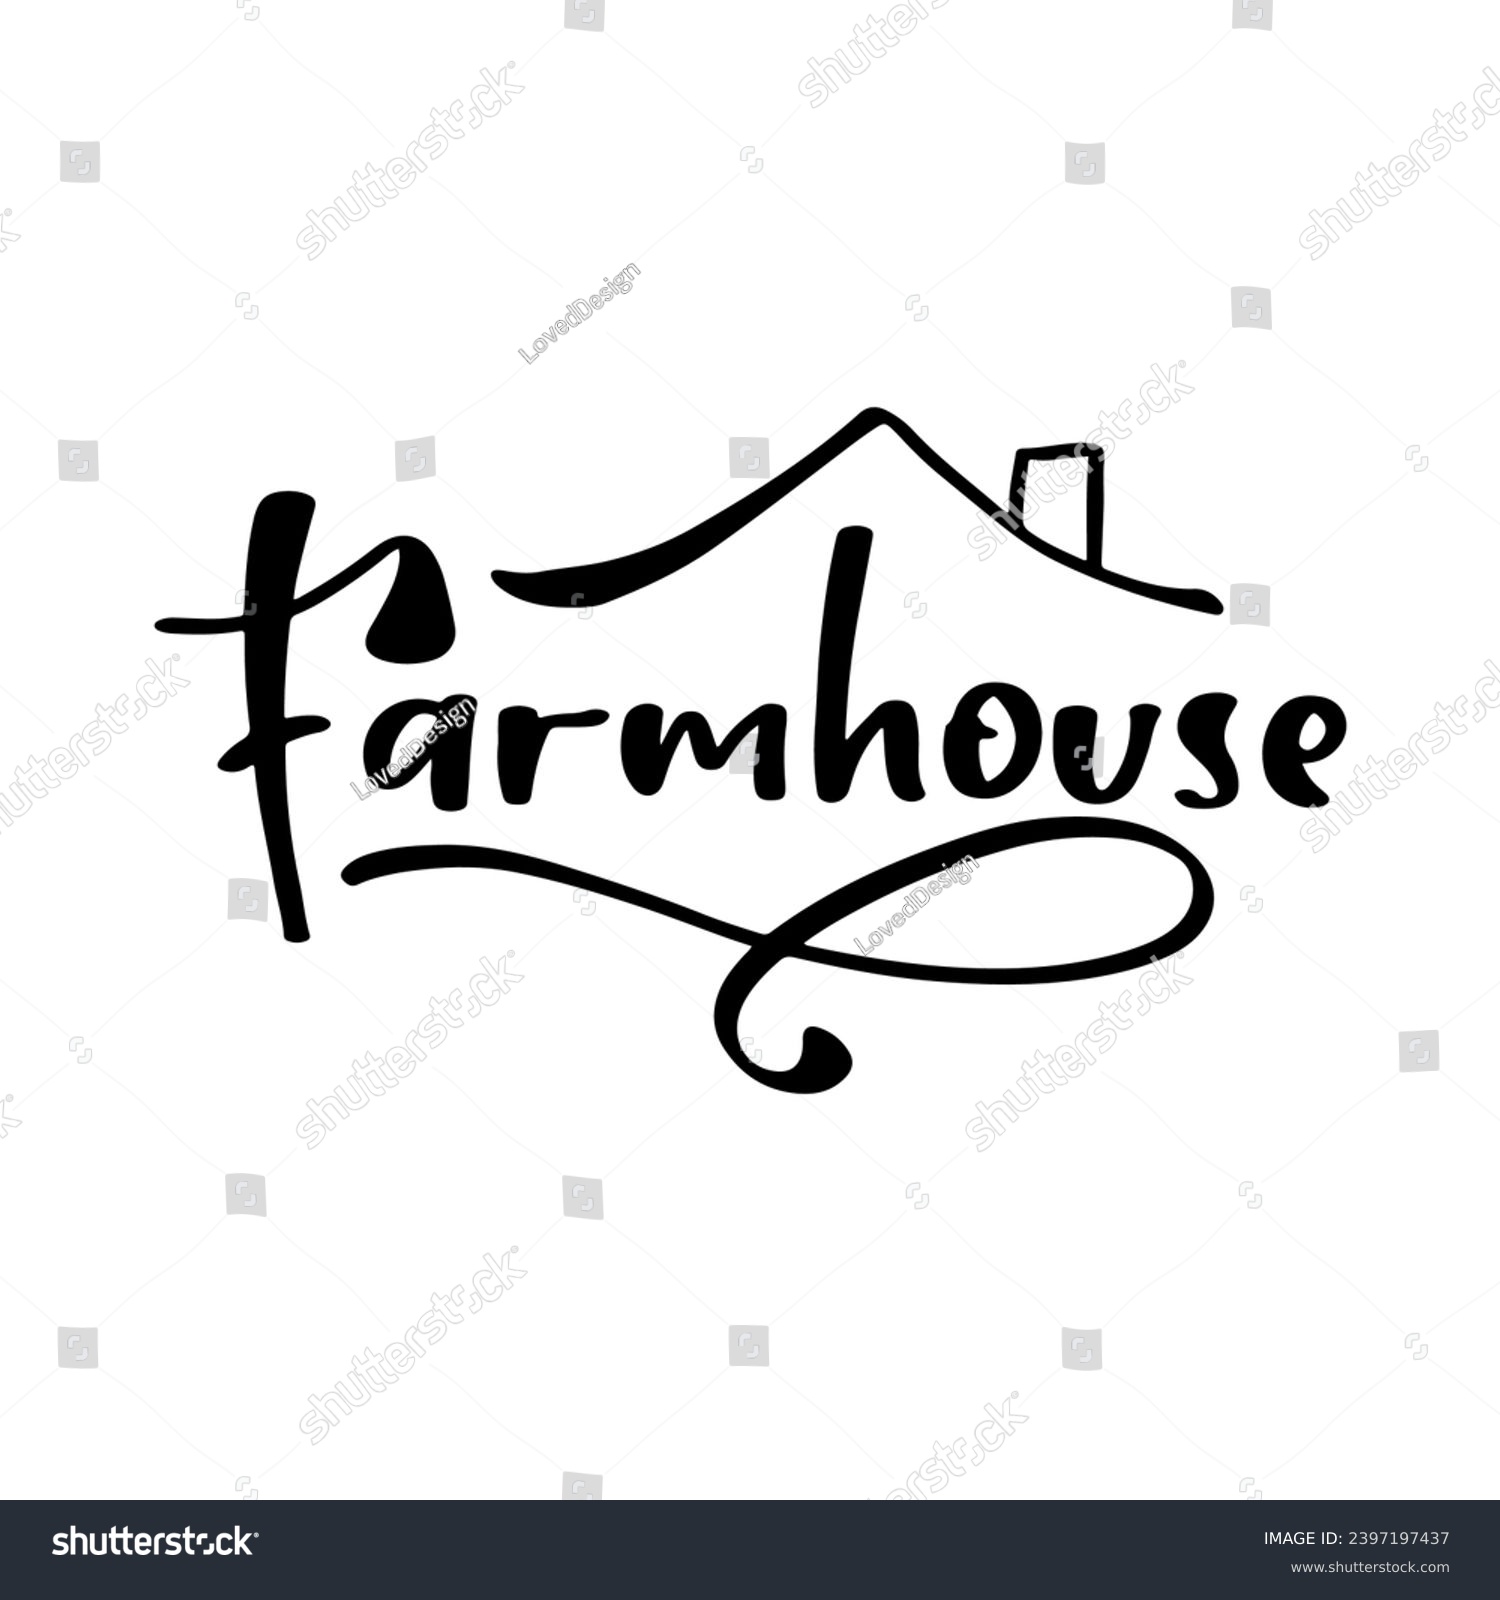 SVG of Farmhouse Lettering Quotes and Phrases For Printable Posters, Cards, Tote Bags Or T-Shirt Design. Funny Farm Quotes And Saying svg